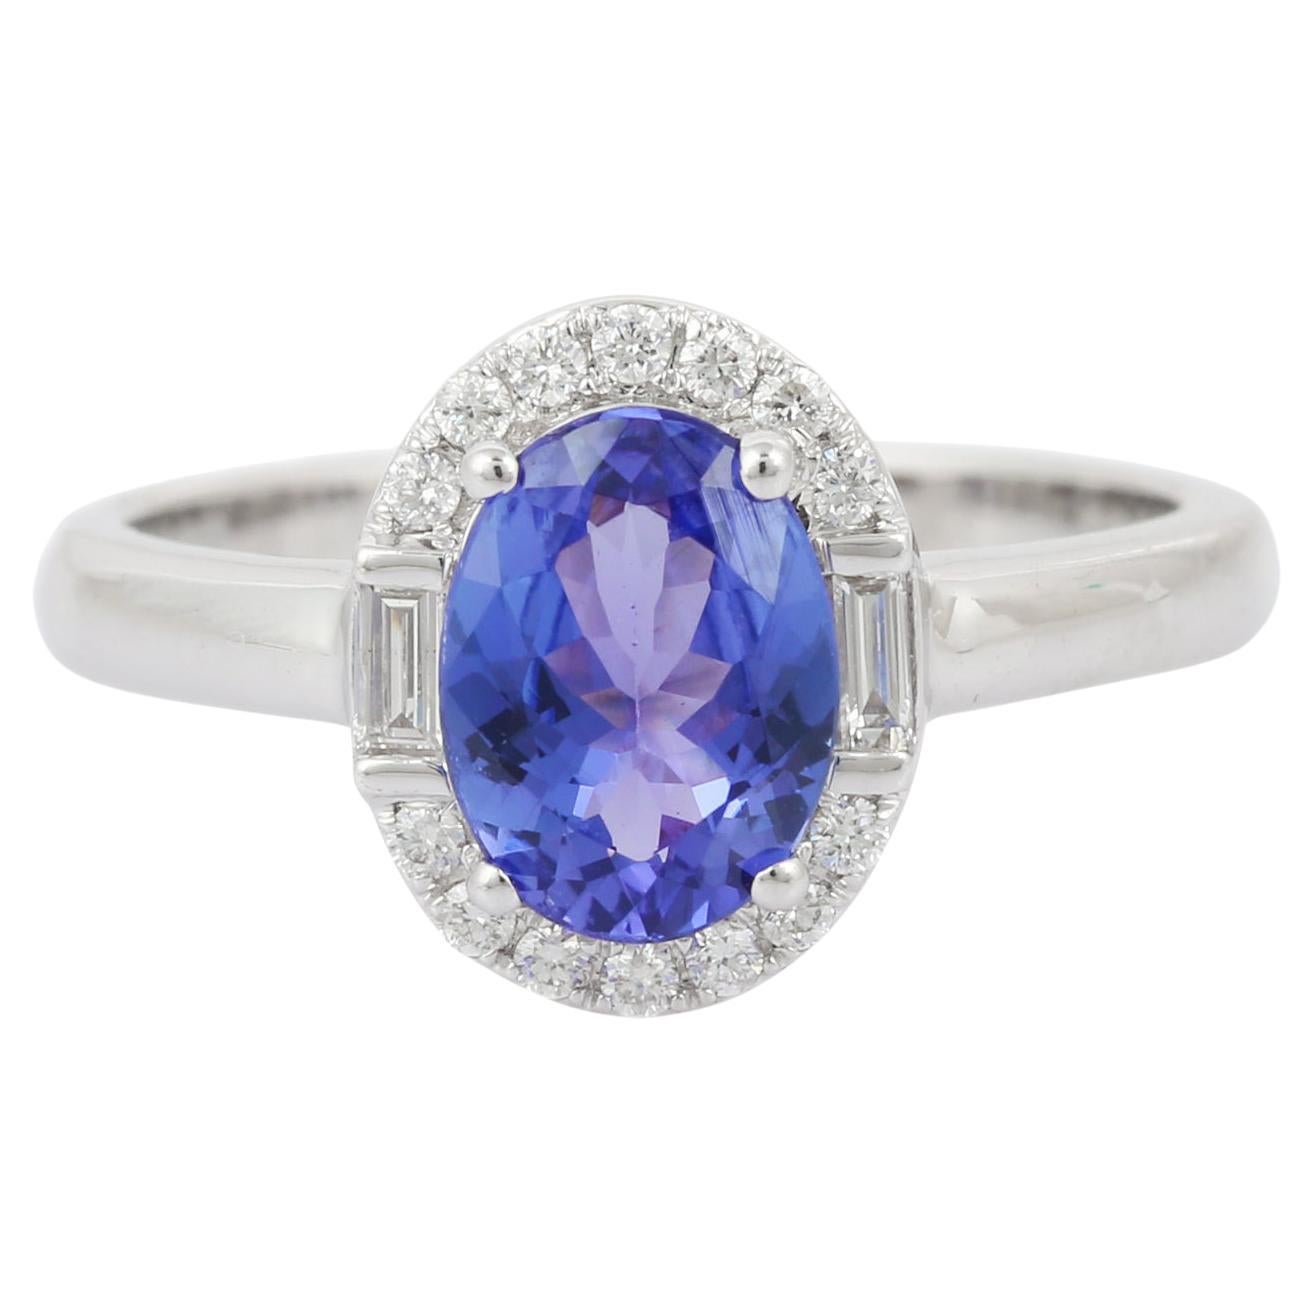 For Sale:  Oval Shape Tanzanite and Diamond Wedding Ring in 18k Solid White Gold